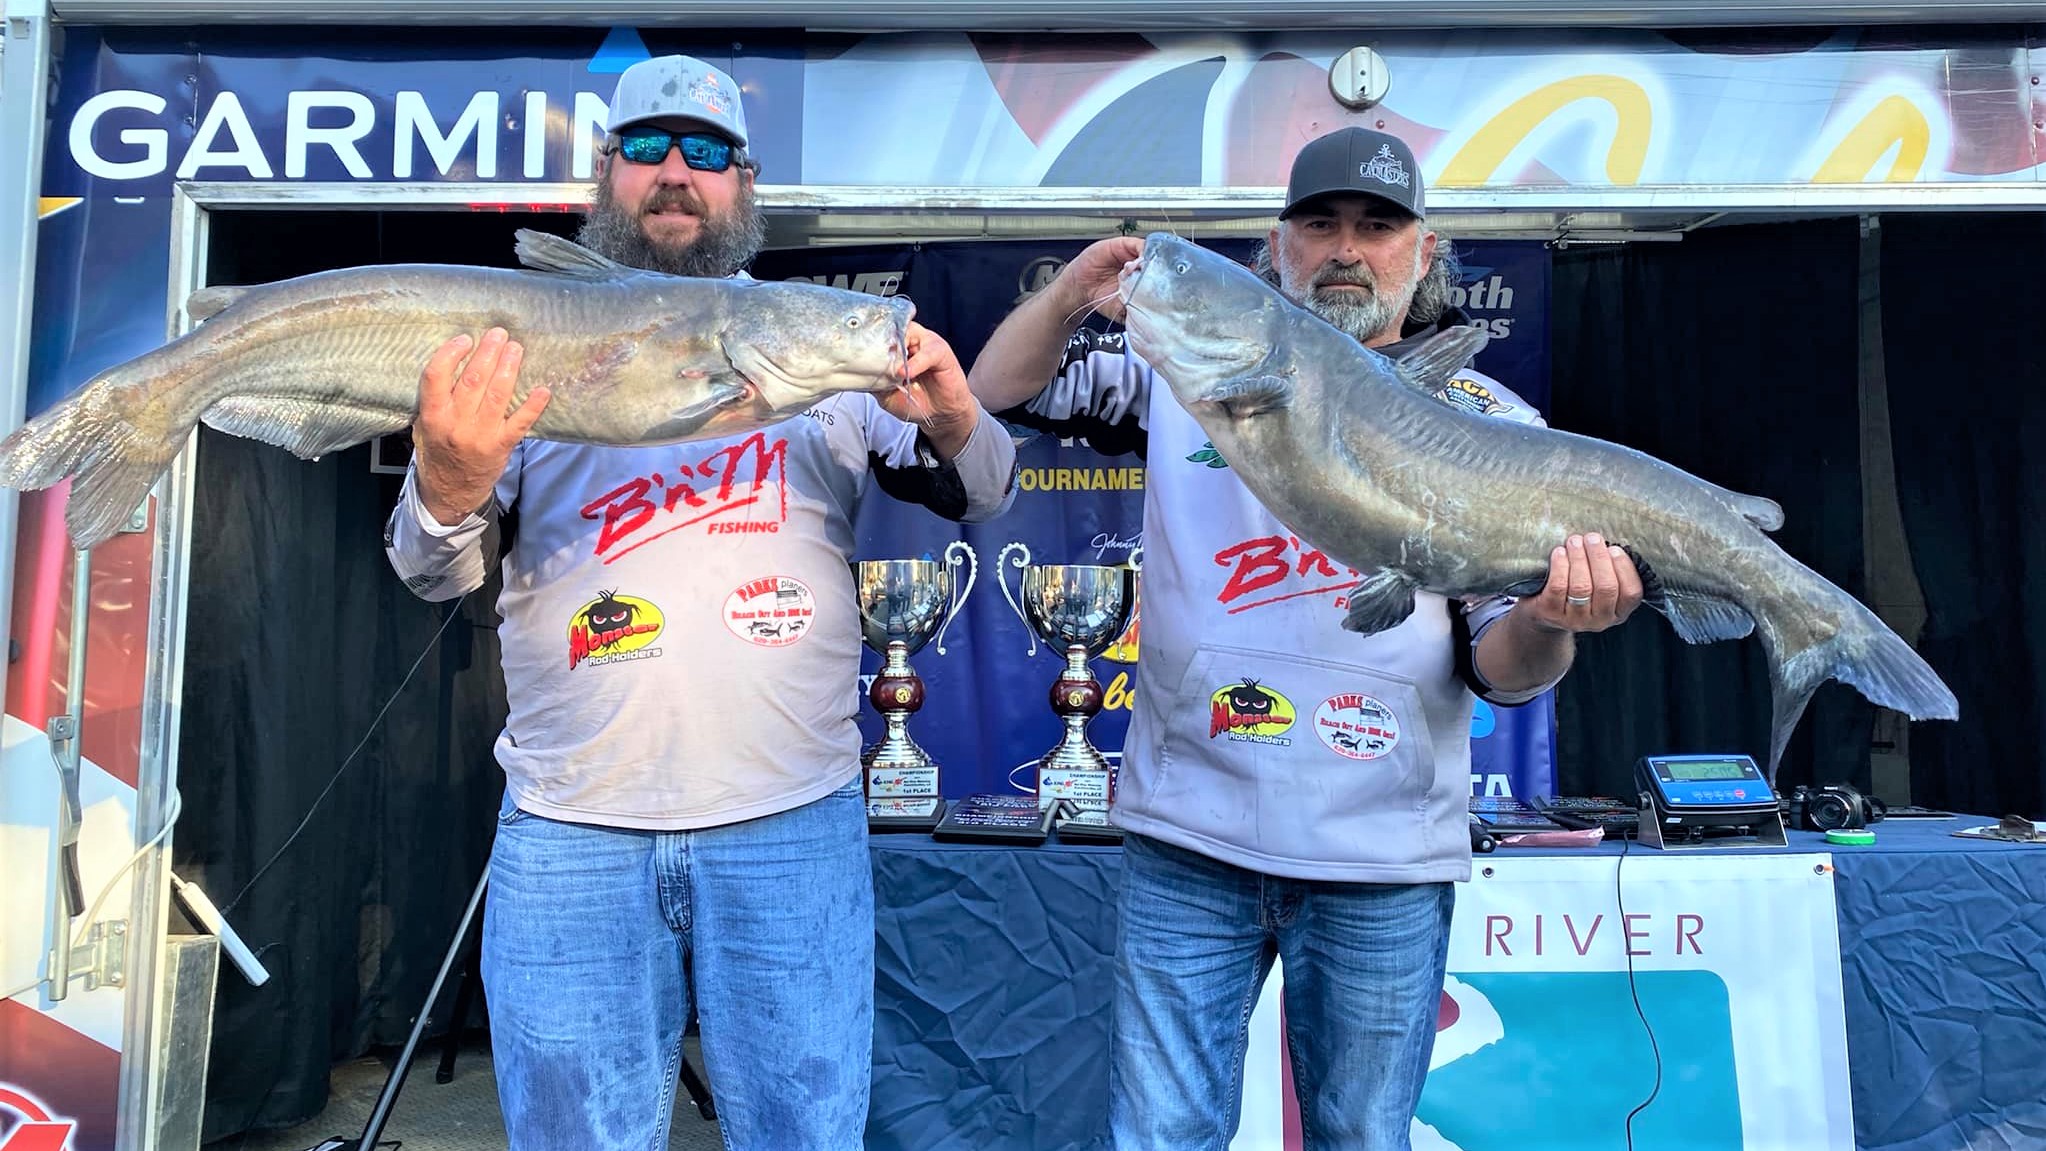 Beginner, catfish, blue cat, flathead, channel, tournament, King Kat, Classic, Championship, Cabelas, Bass Pro, Alex Nagy, Charles Blair, Doug Vaughan, Bryan St Ama, Natchitoches, LA, Coia Sneed, Red River Waterway, Donnie Fountain, Lonnie Fountain, Ron Barner, Wanda Barner